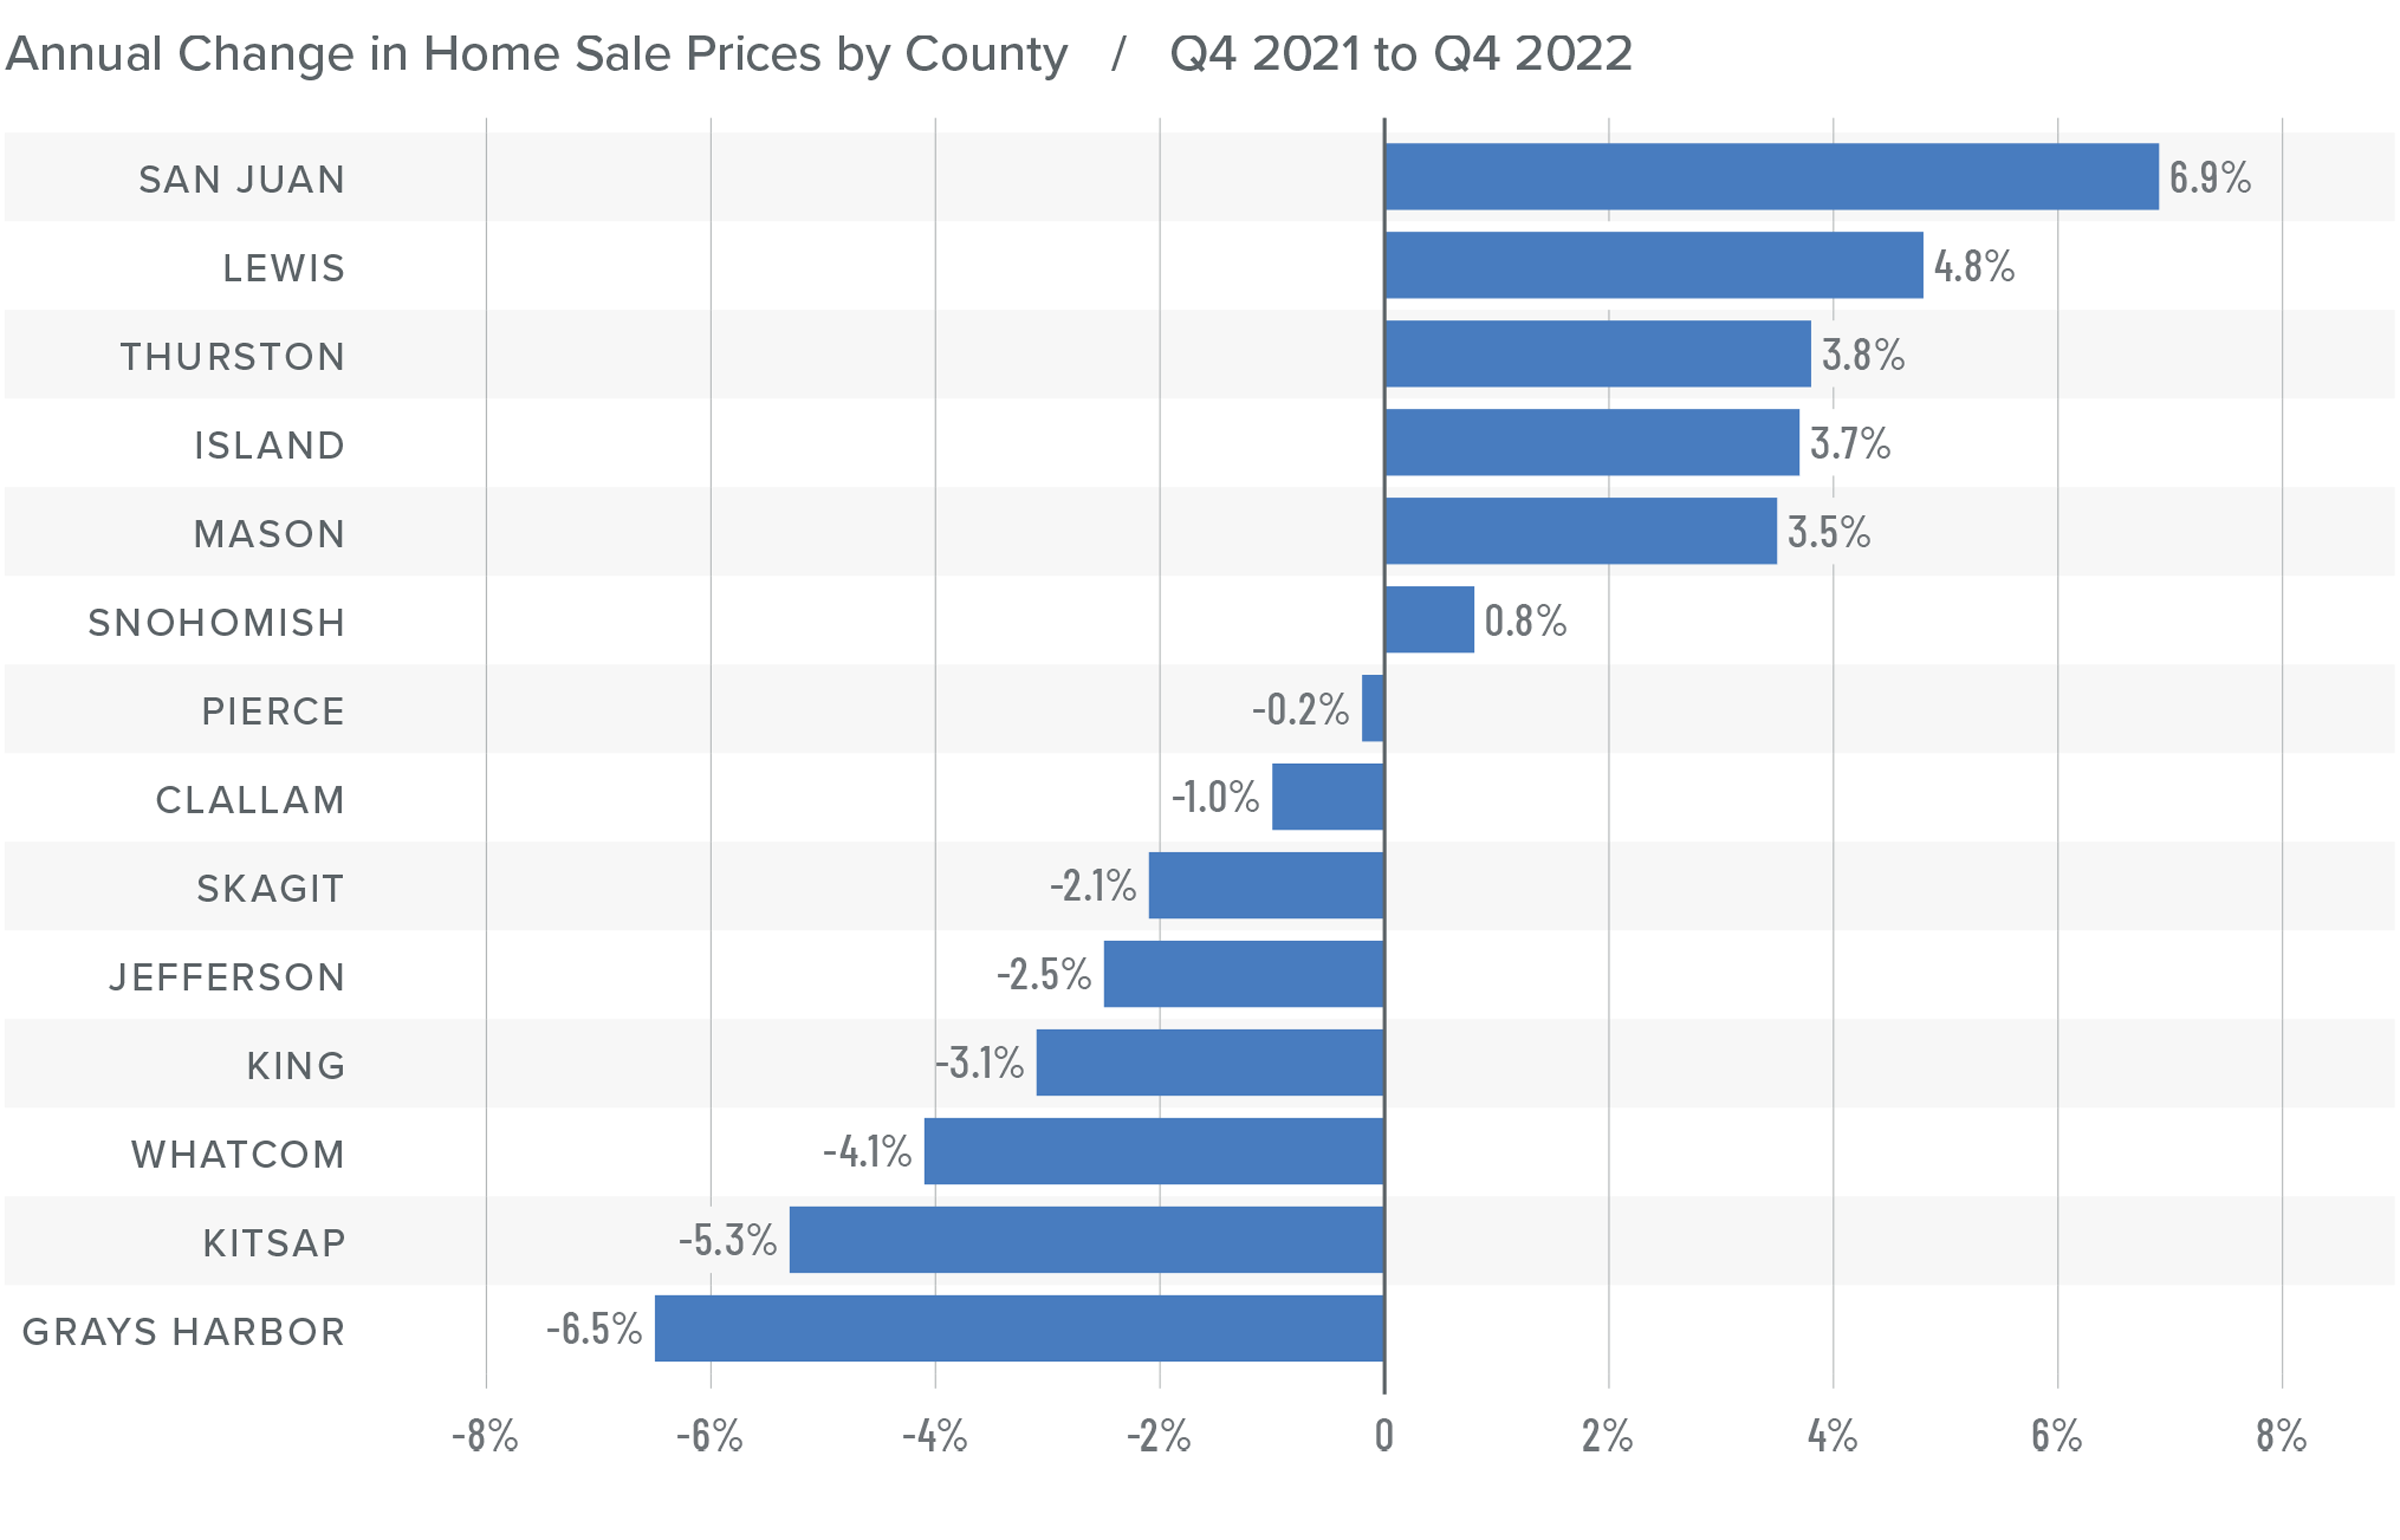 A bar graph showing the annual change in home sale prices for various counties in Western Washington from Q4 2021 to Q4 2022. San Juan County tops the list at 6.9%, followed by Lewis at 4.8%, Thurston at 3.8%, Island at 3.7%, Mason at 3.5%, Snohomish at 0.8%, Pierce at -0.2%, Clallam at -1%, Skagit at -2.1%, Jefferson at -2.5%, King at -3.1%, Whatcom at -4.1%, Kitsap at -5.3%, and finally Grays Harbor at -6.5%.